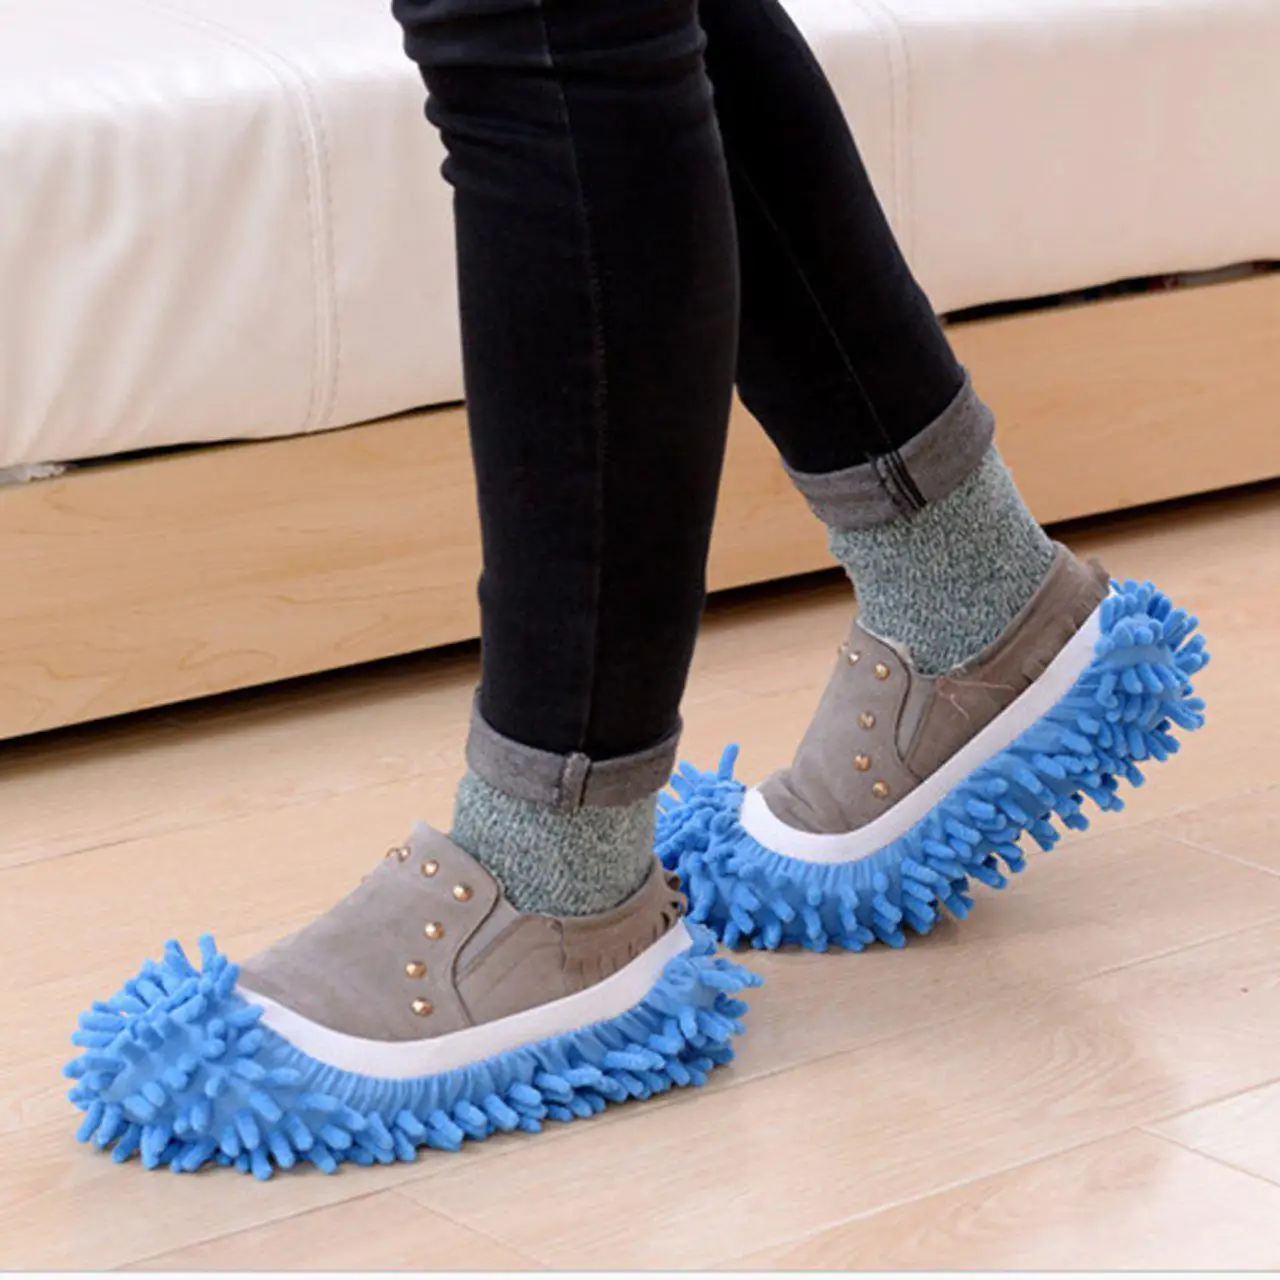 Hoomall 1PC Shoe Cover Women Fashion Fiber Slippers Washable Dust Mop Slippers Cleaning Shoes Microfiber Cleaning Cloth